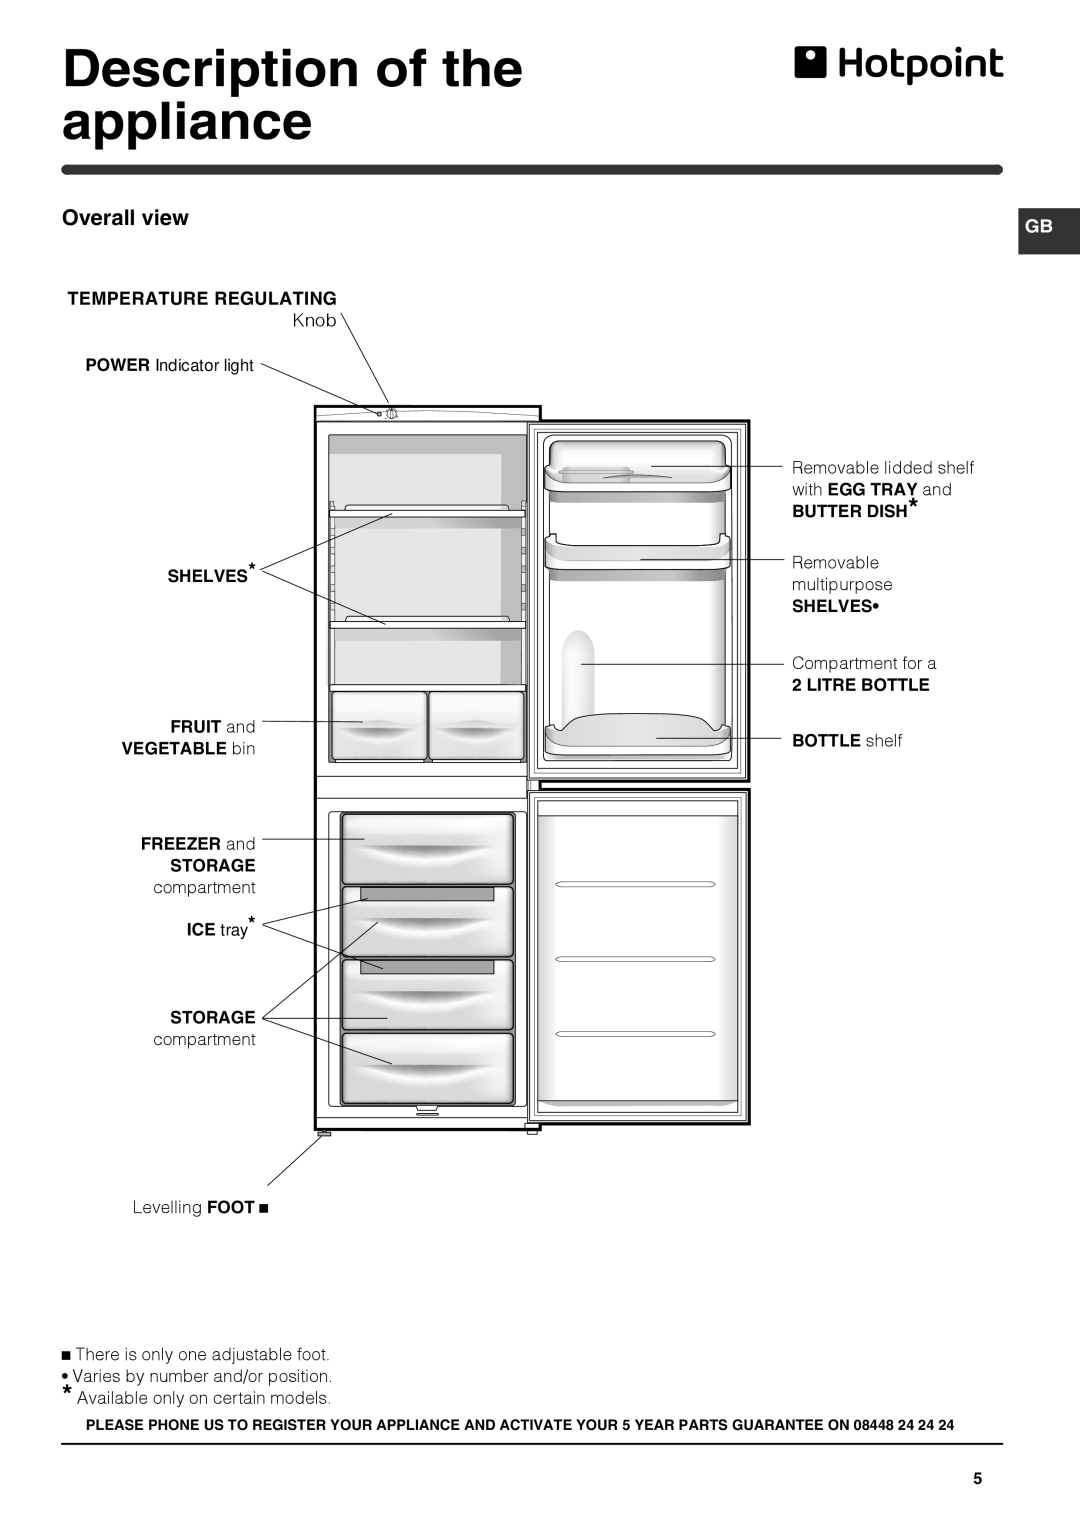 Hotpoint ffaa52k-1 manual Description of the appliance, Overall view, compartment 